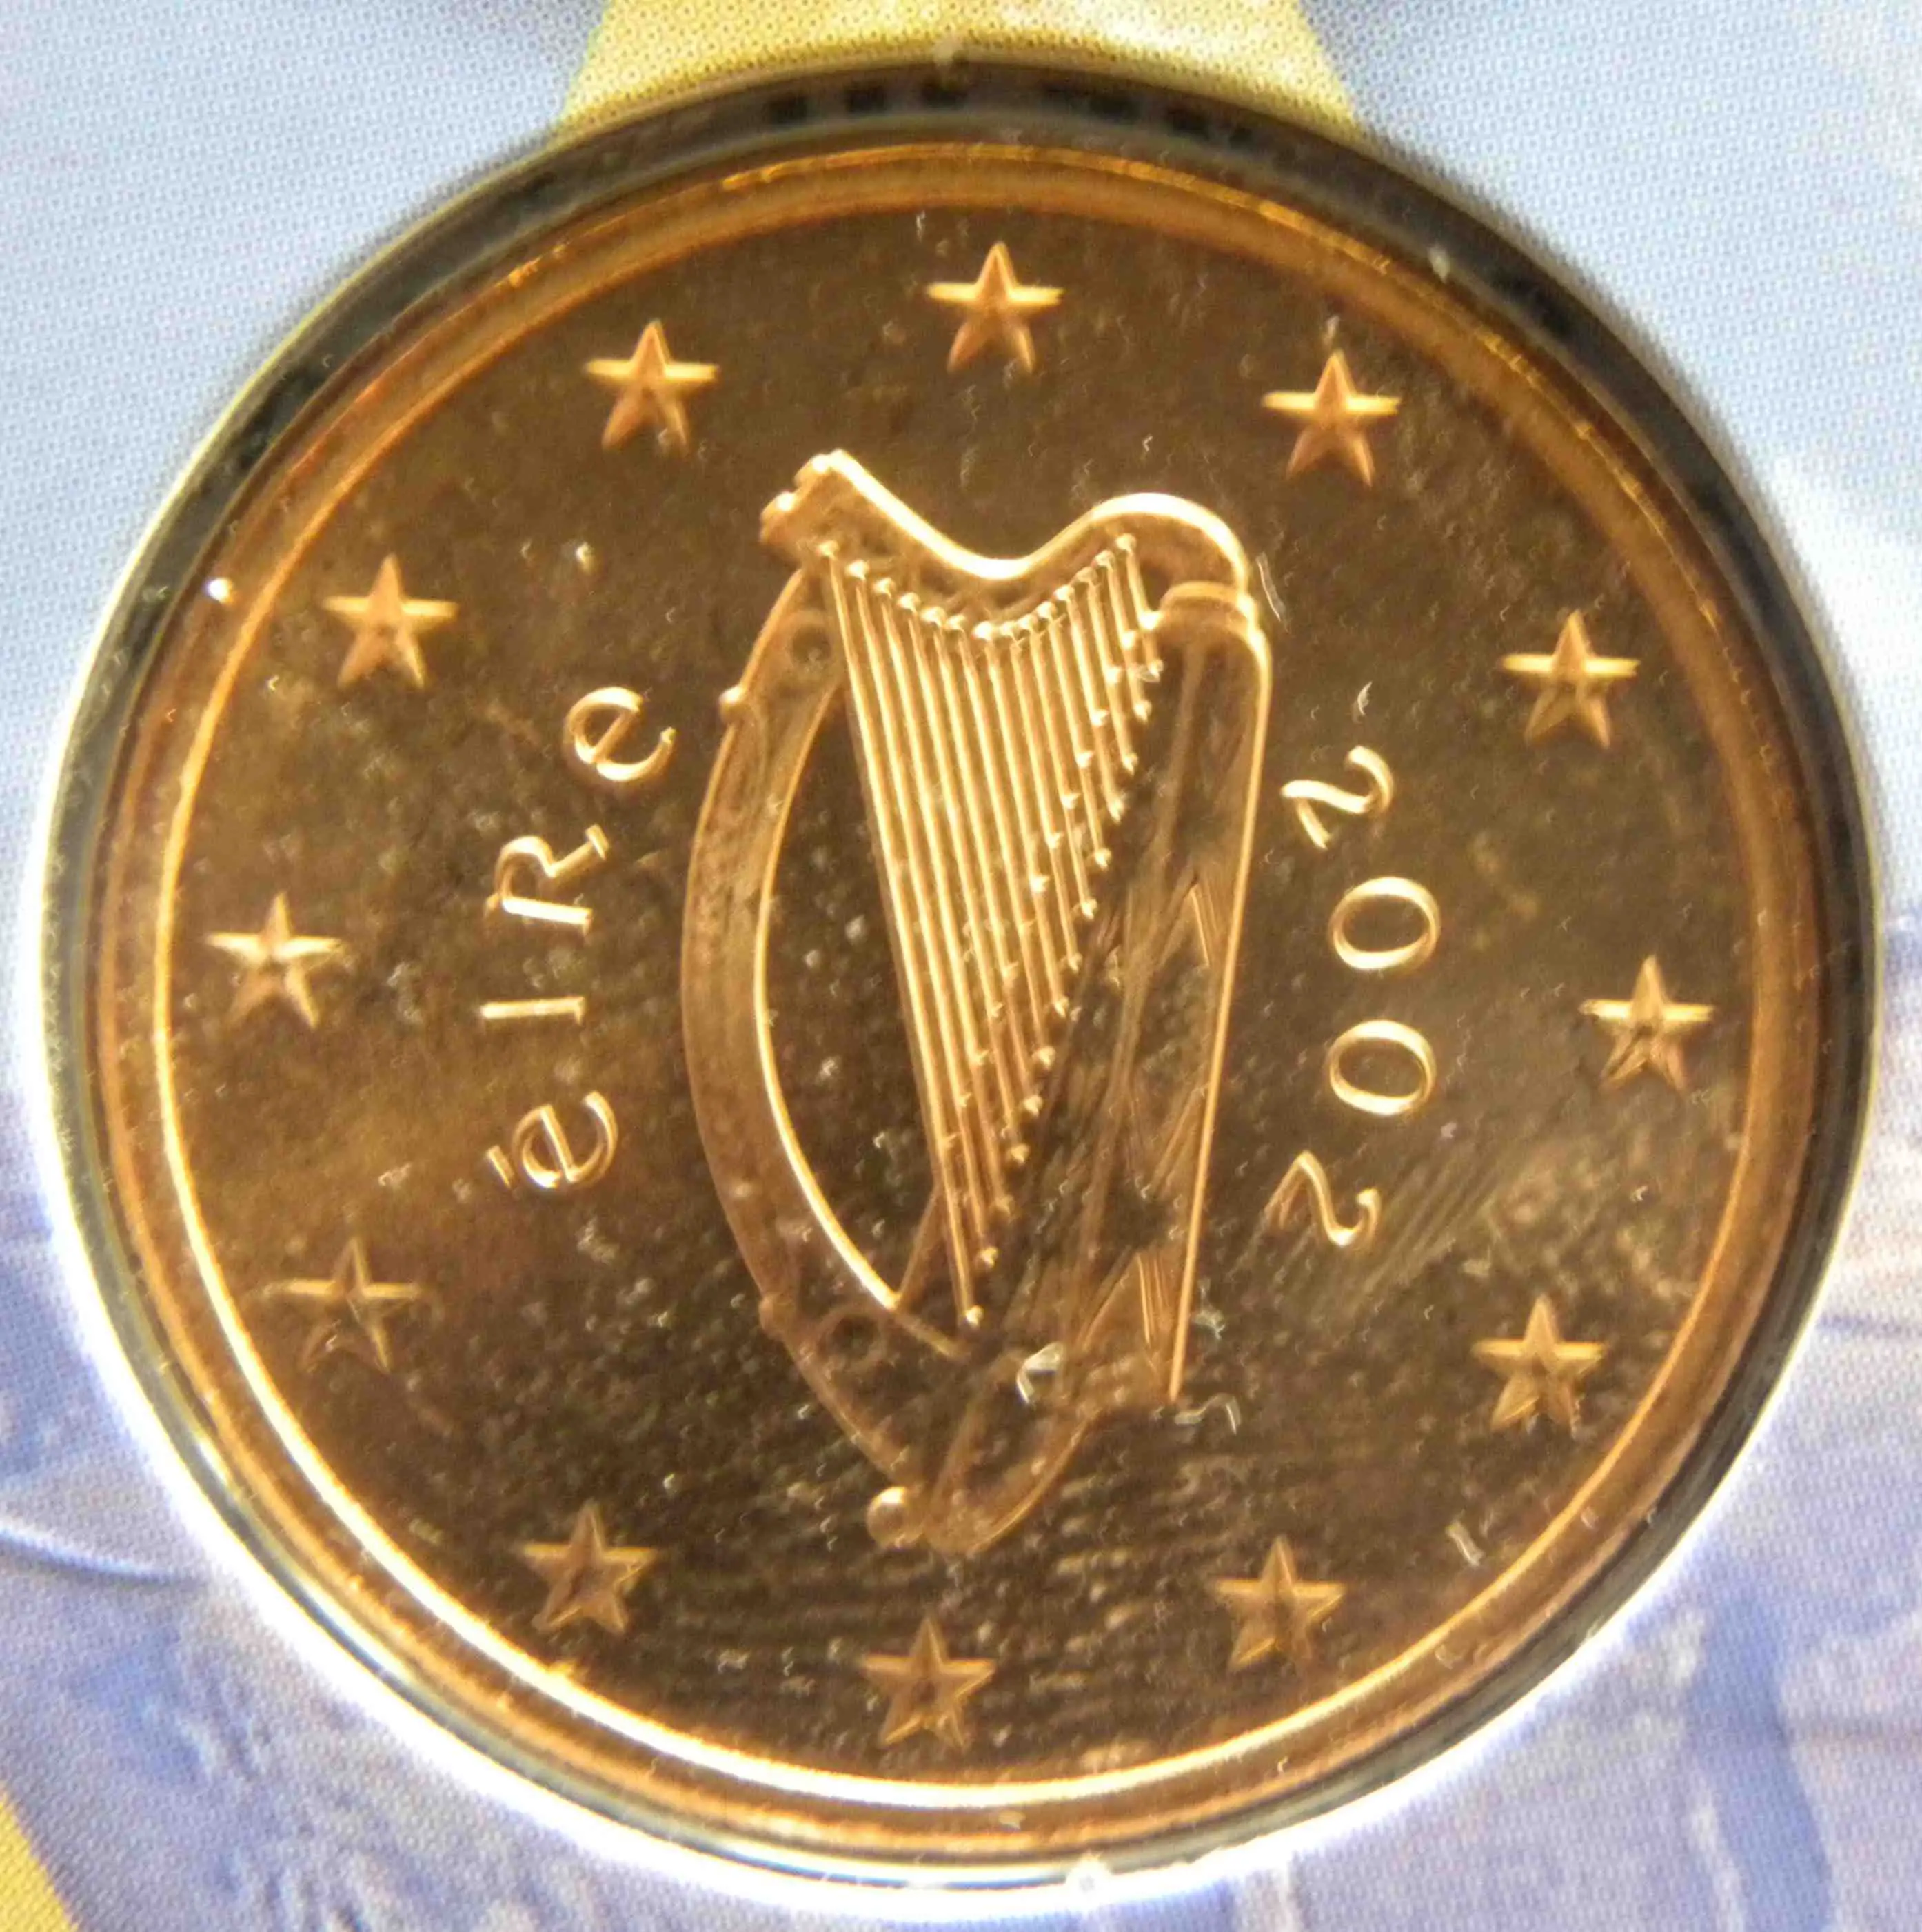 euro cent coin images